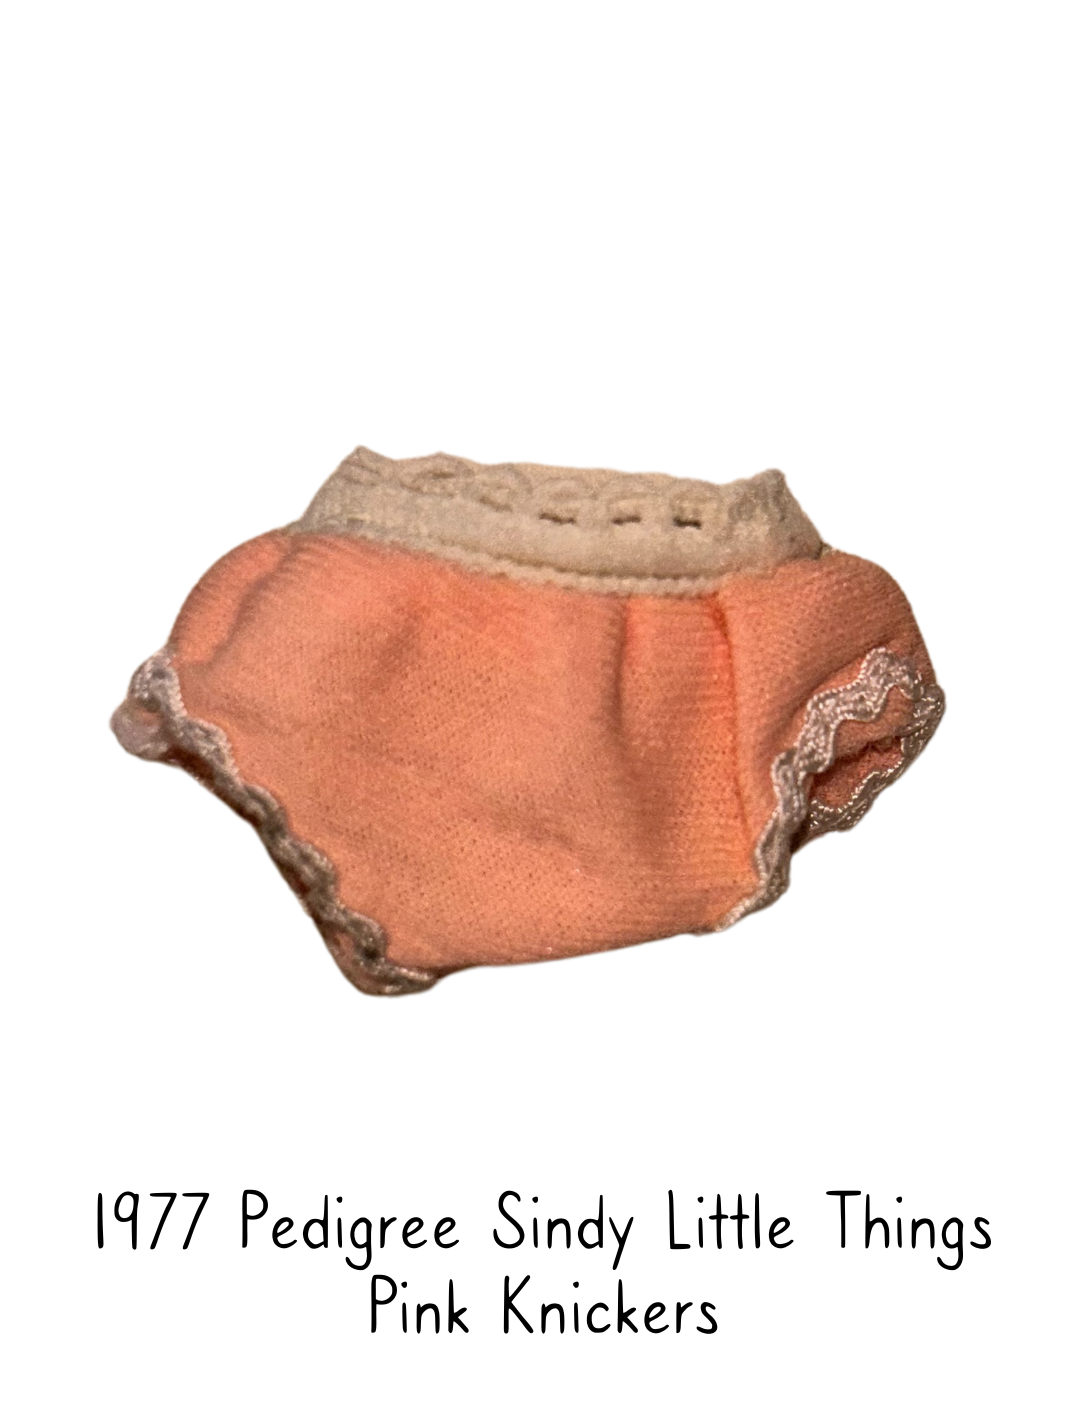 1977 Pedigree Sindy Fashion Doll Little Things Lingerie Pink Knickers